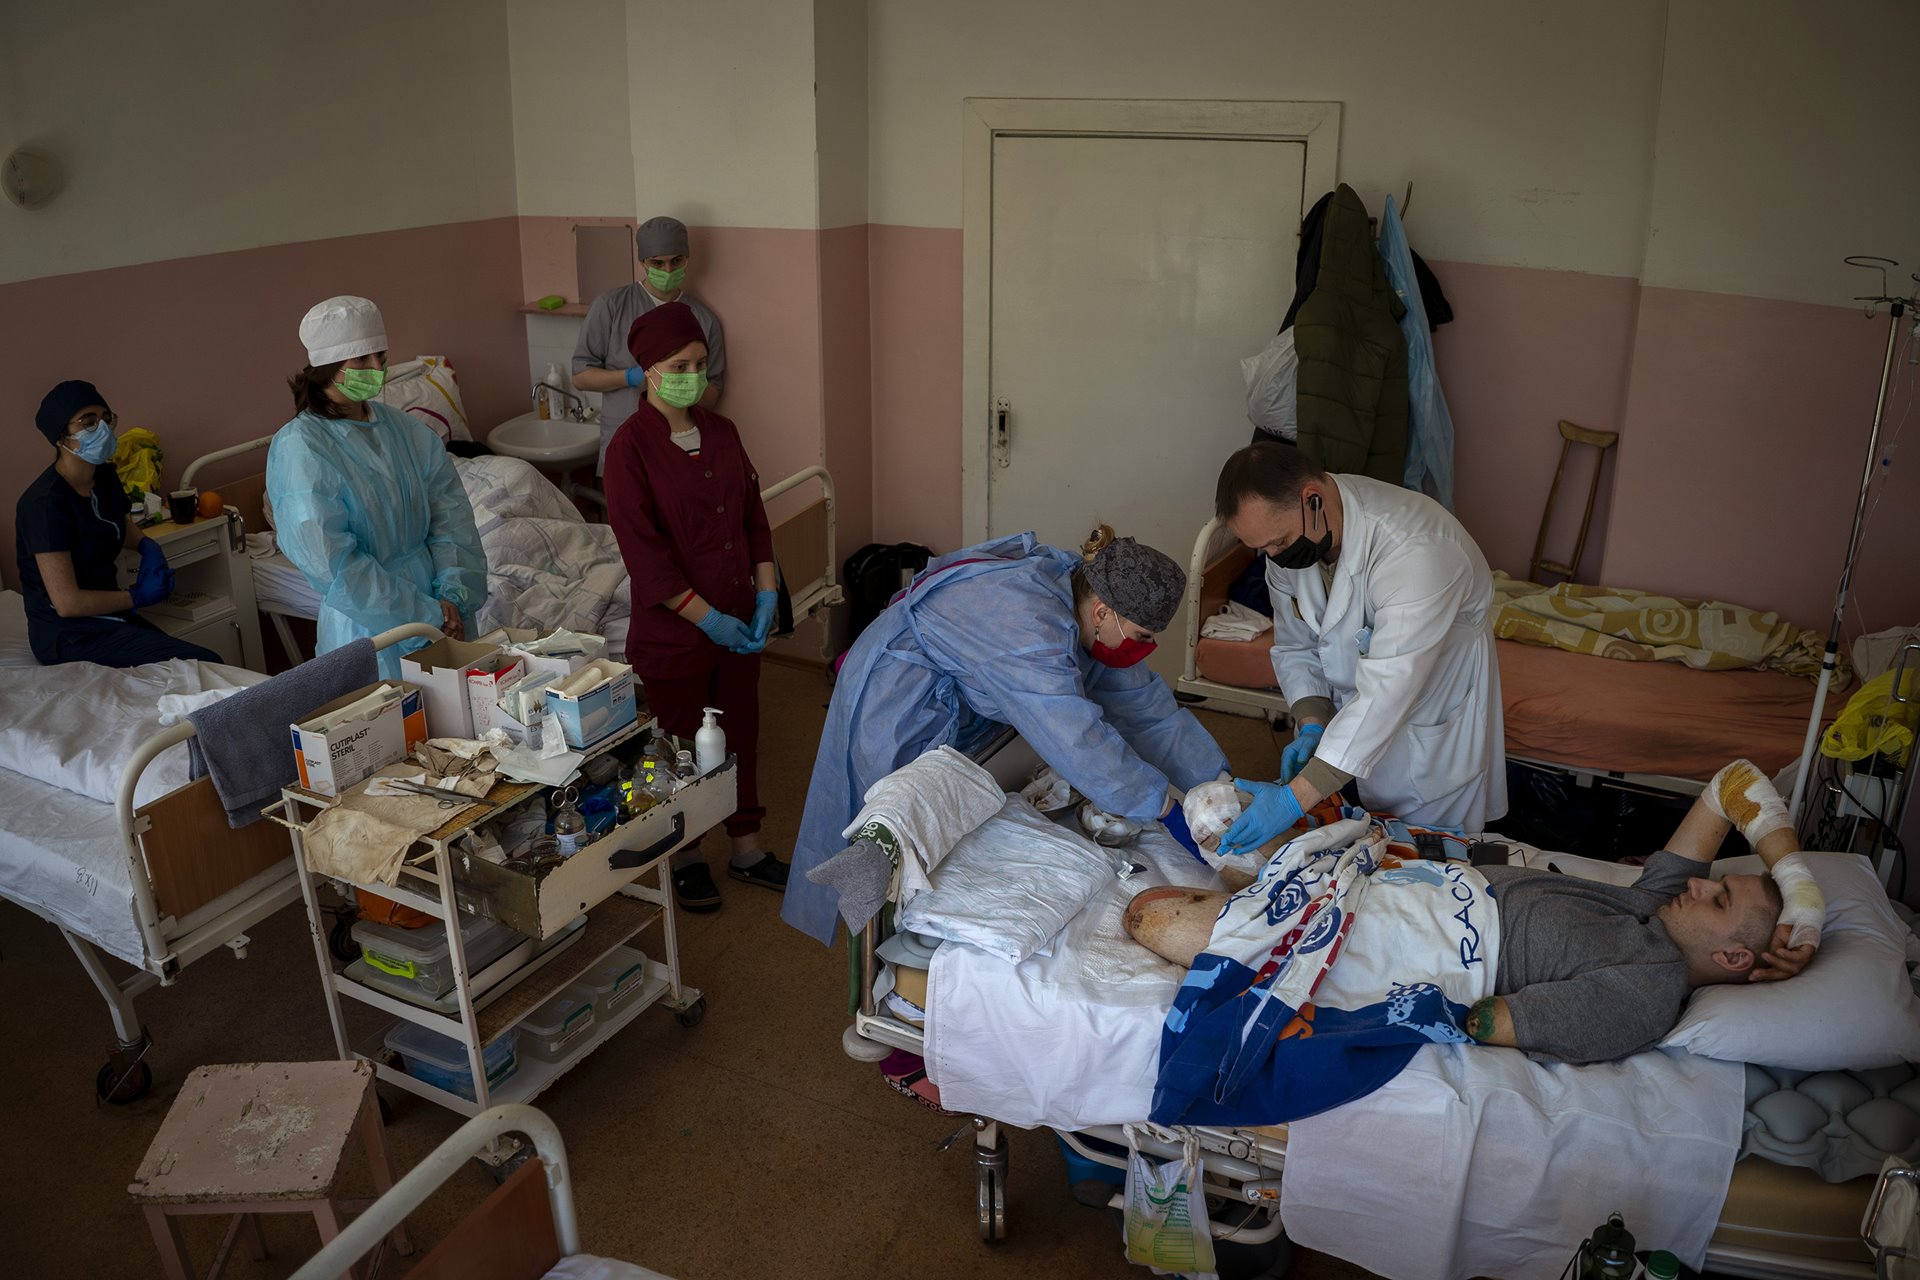 Anton Gladun (22) has his wounds cleaned by hospital doctors, in Cherkasy, Ukraine. Anton, a military medic deployed on the front line in eastern Ukraine, lost both legs and the left arm in an explosion on 27 March.